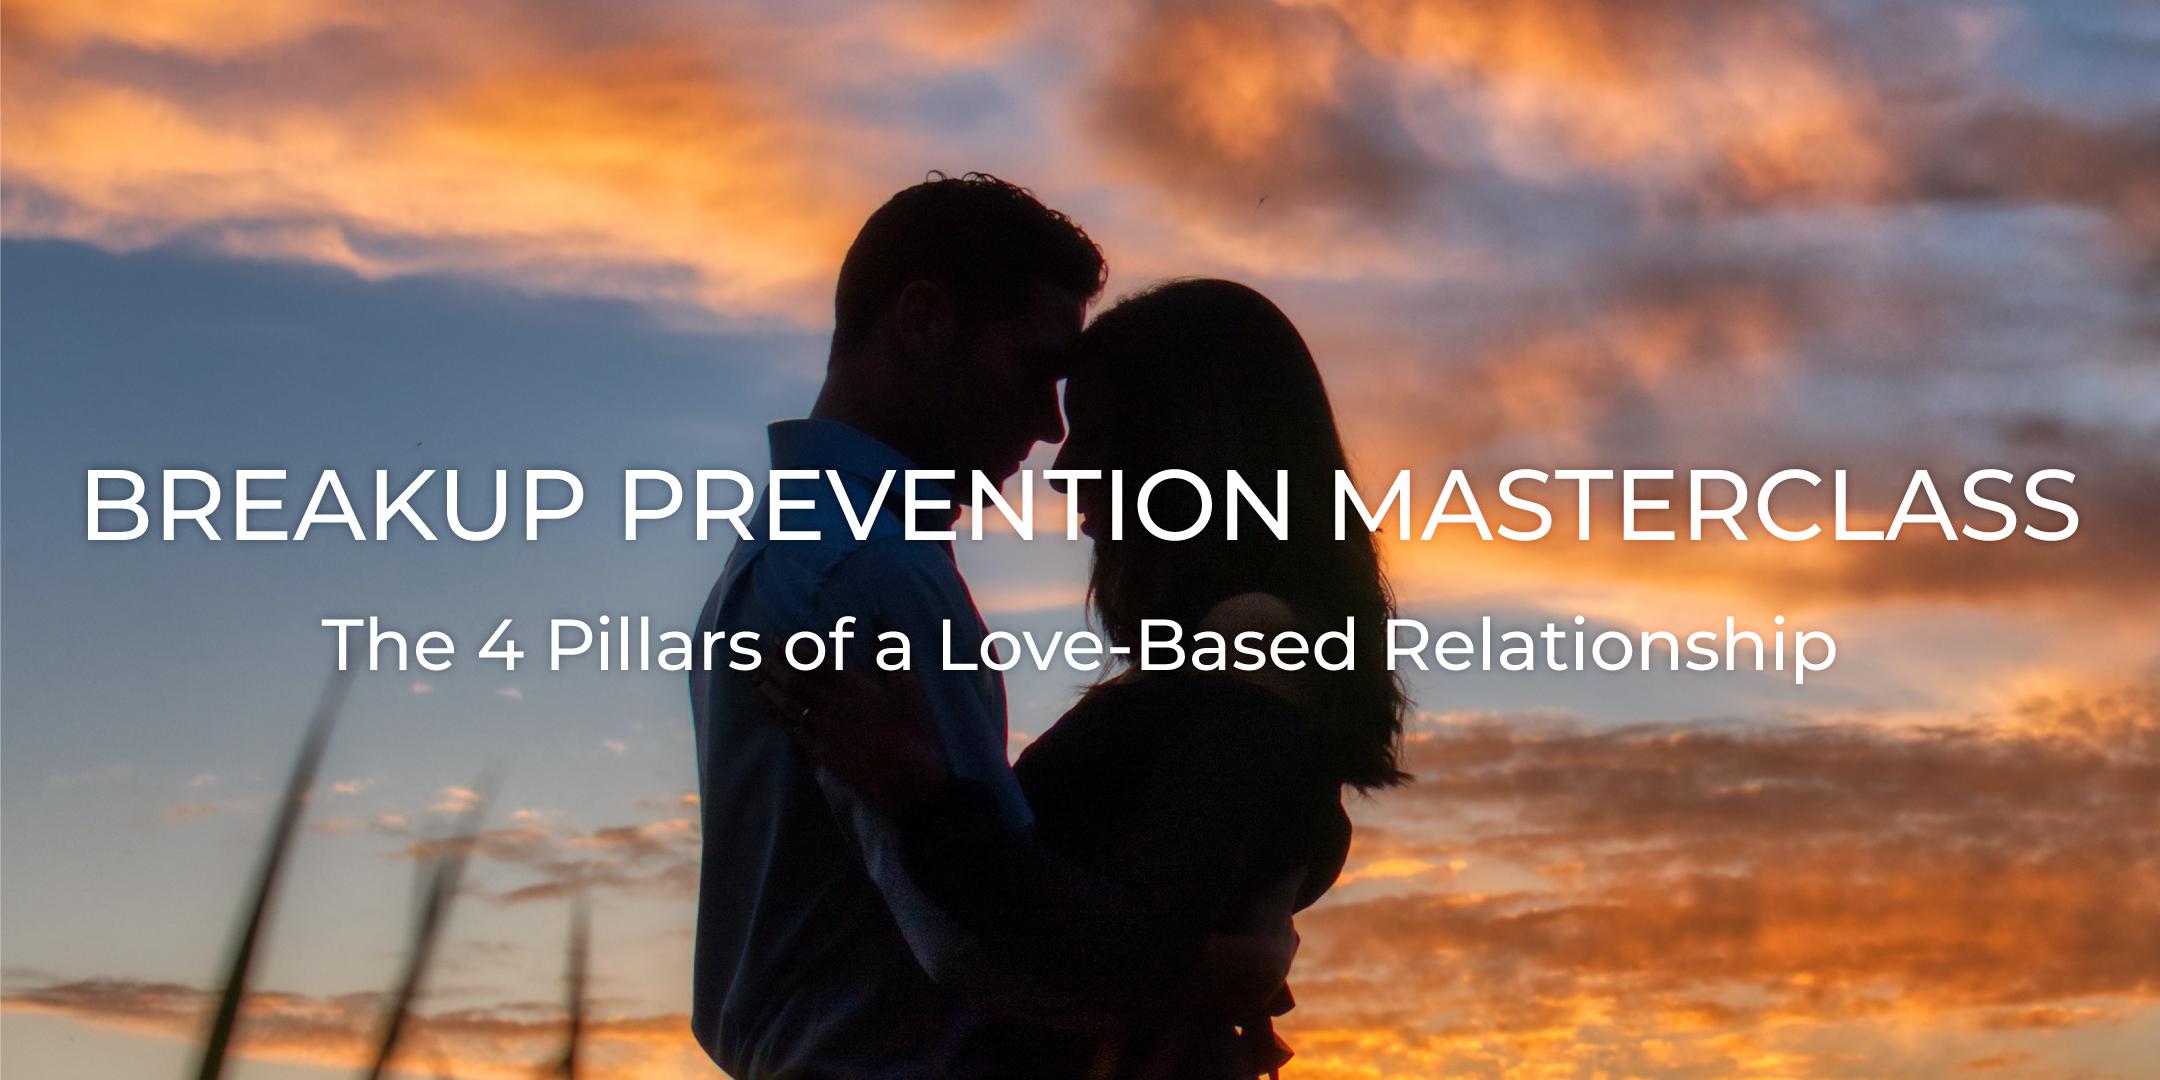 Breakup Prevention Masterclass - The 4 Pillars of a Love-Based Relationship